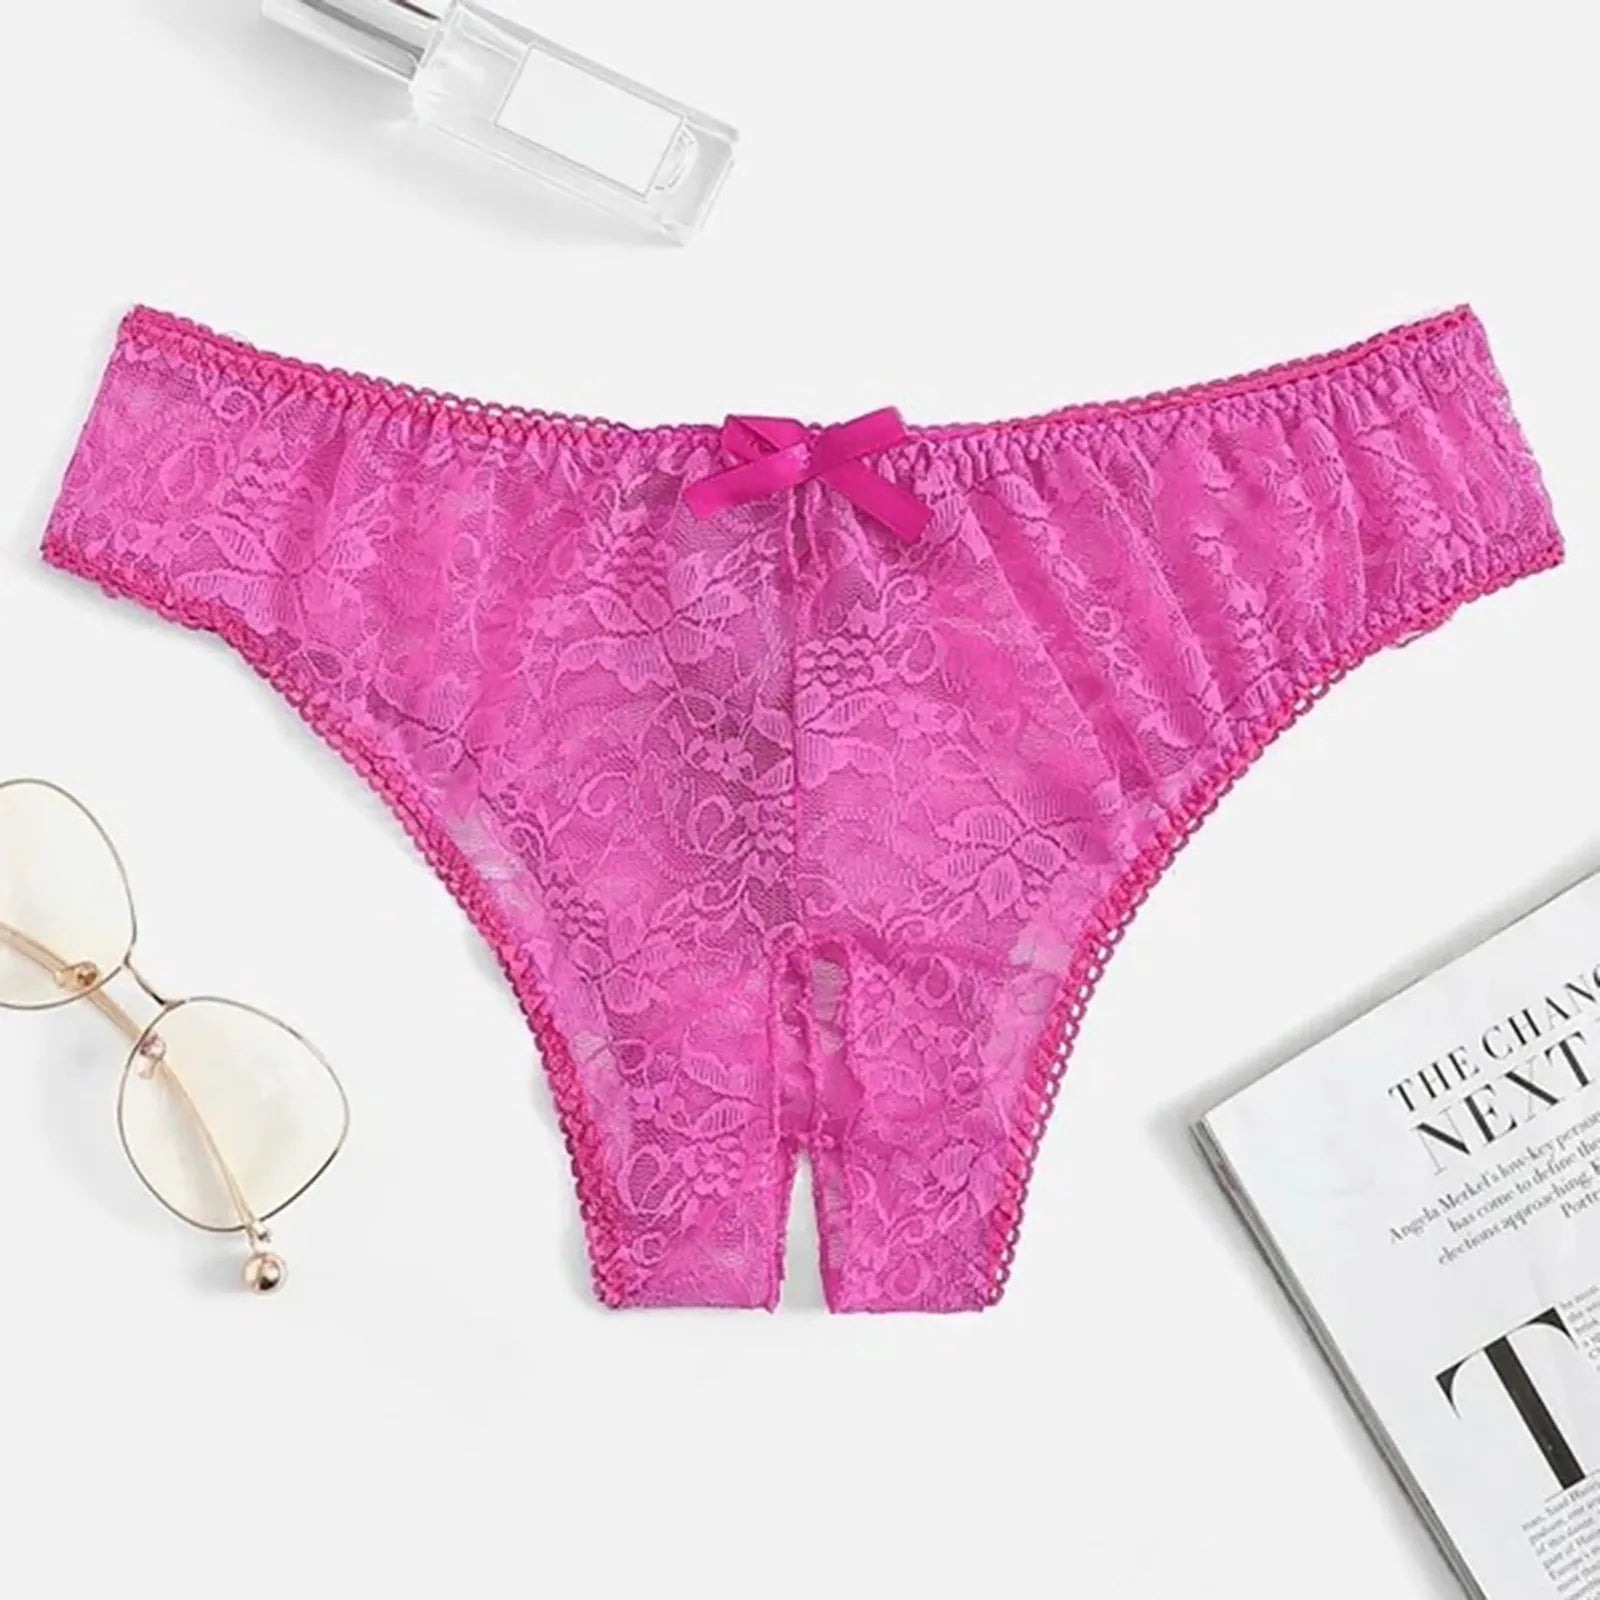 Lace Open Crotch G-string Panties